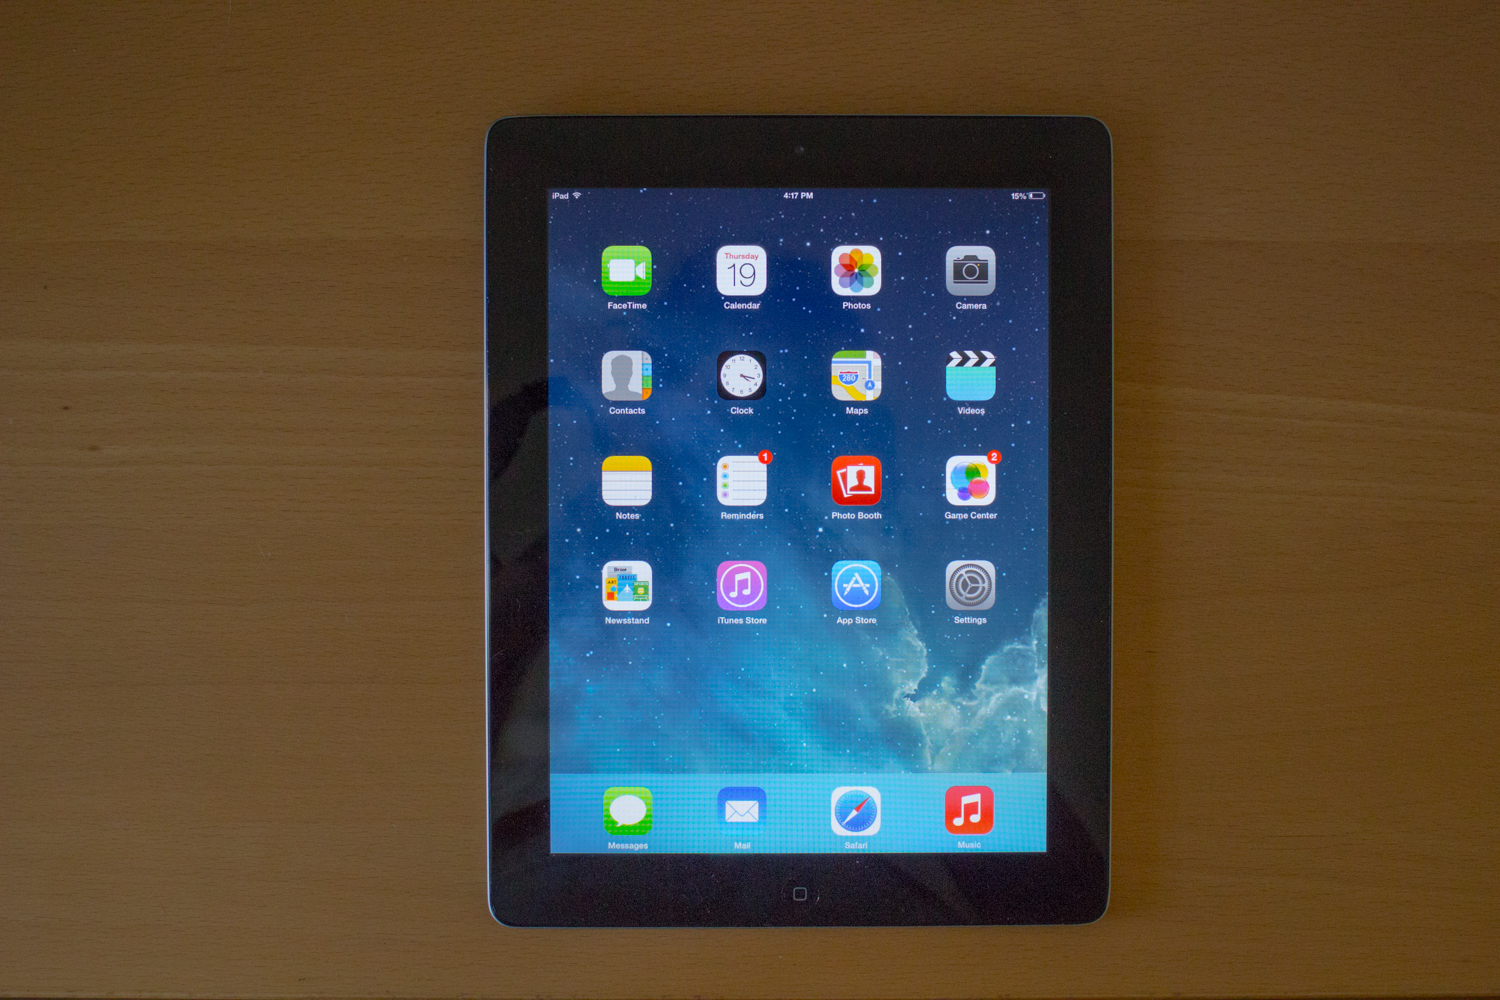 Don’t let me down, Apple: iOS 7 on the iPad 2 | Ars Technica